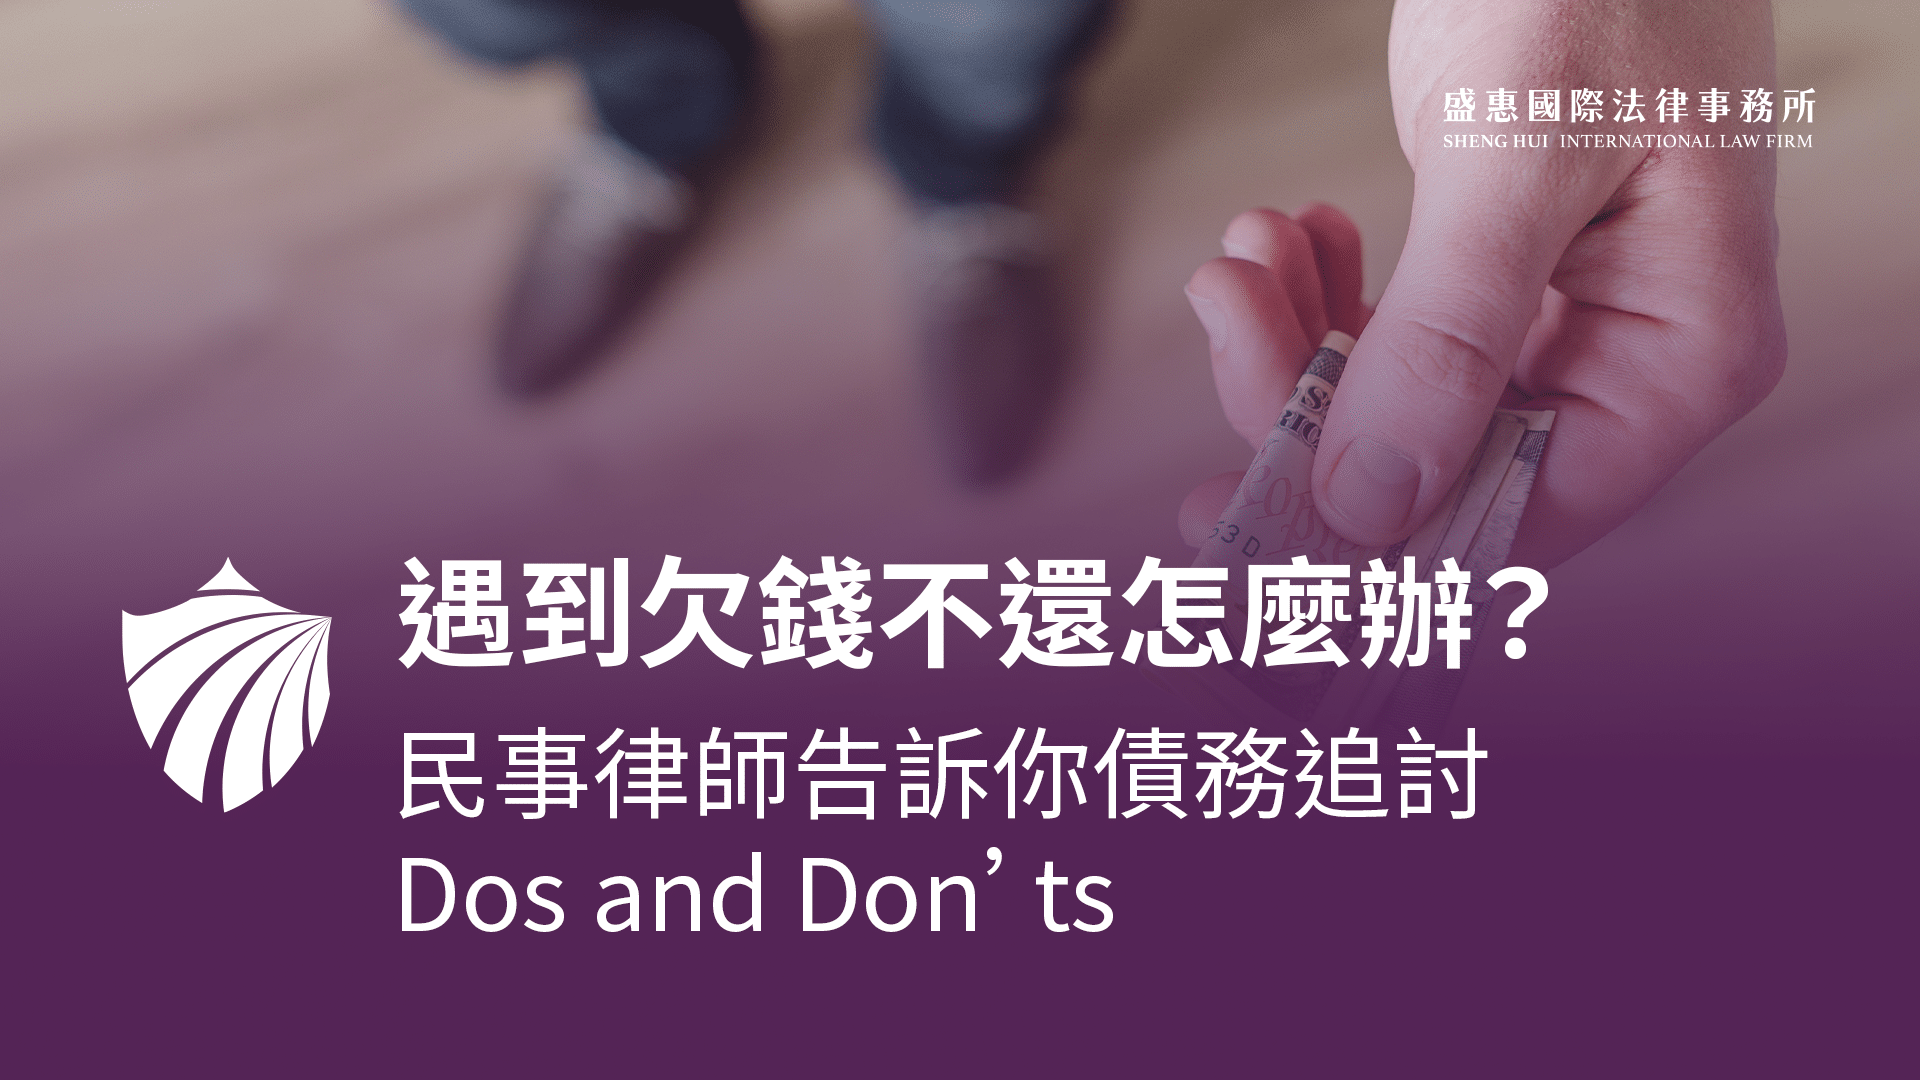 Read more about the article 遇到欠錢不還的人，我該怎麼做？民事律師告訴你債務追討 Dos and Don’ts